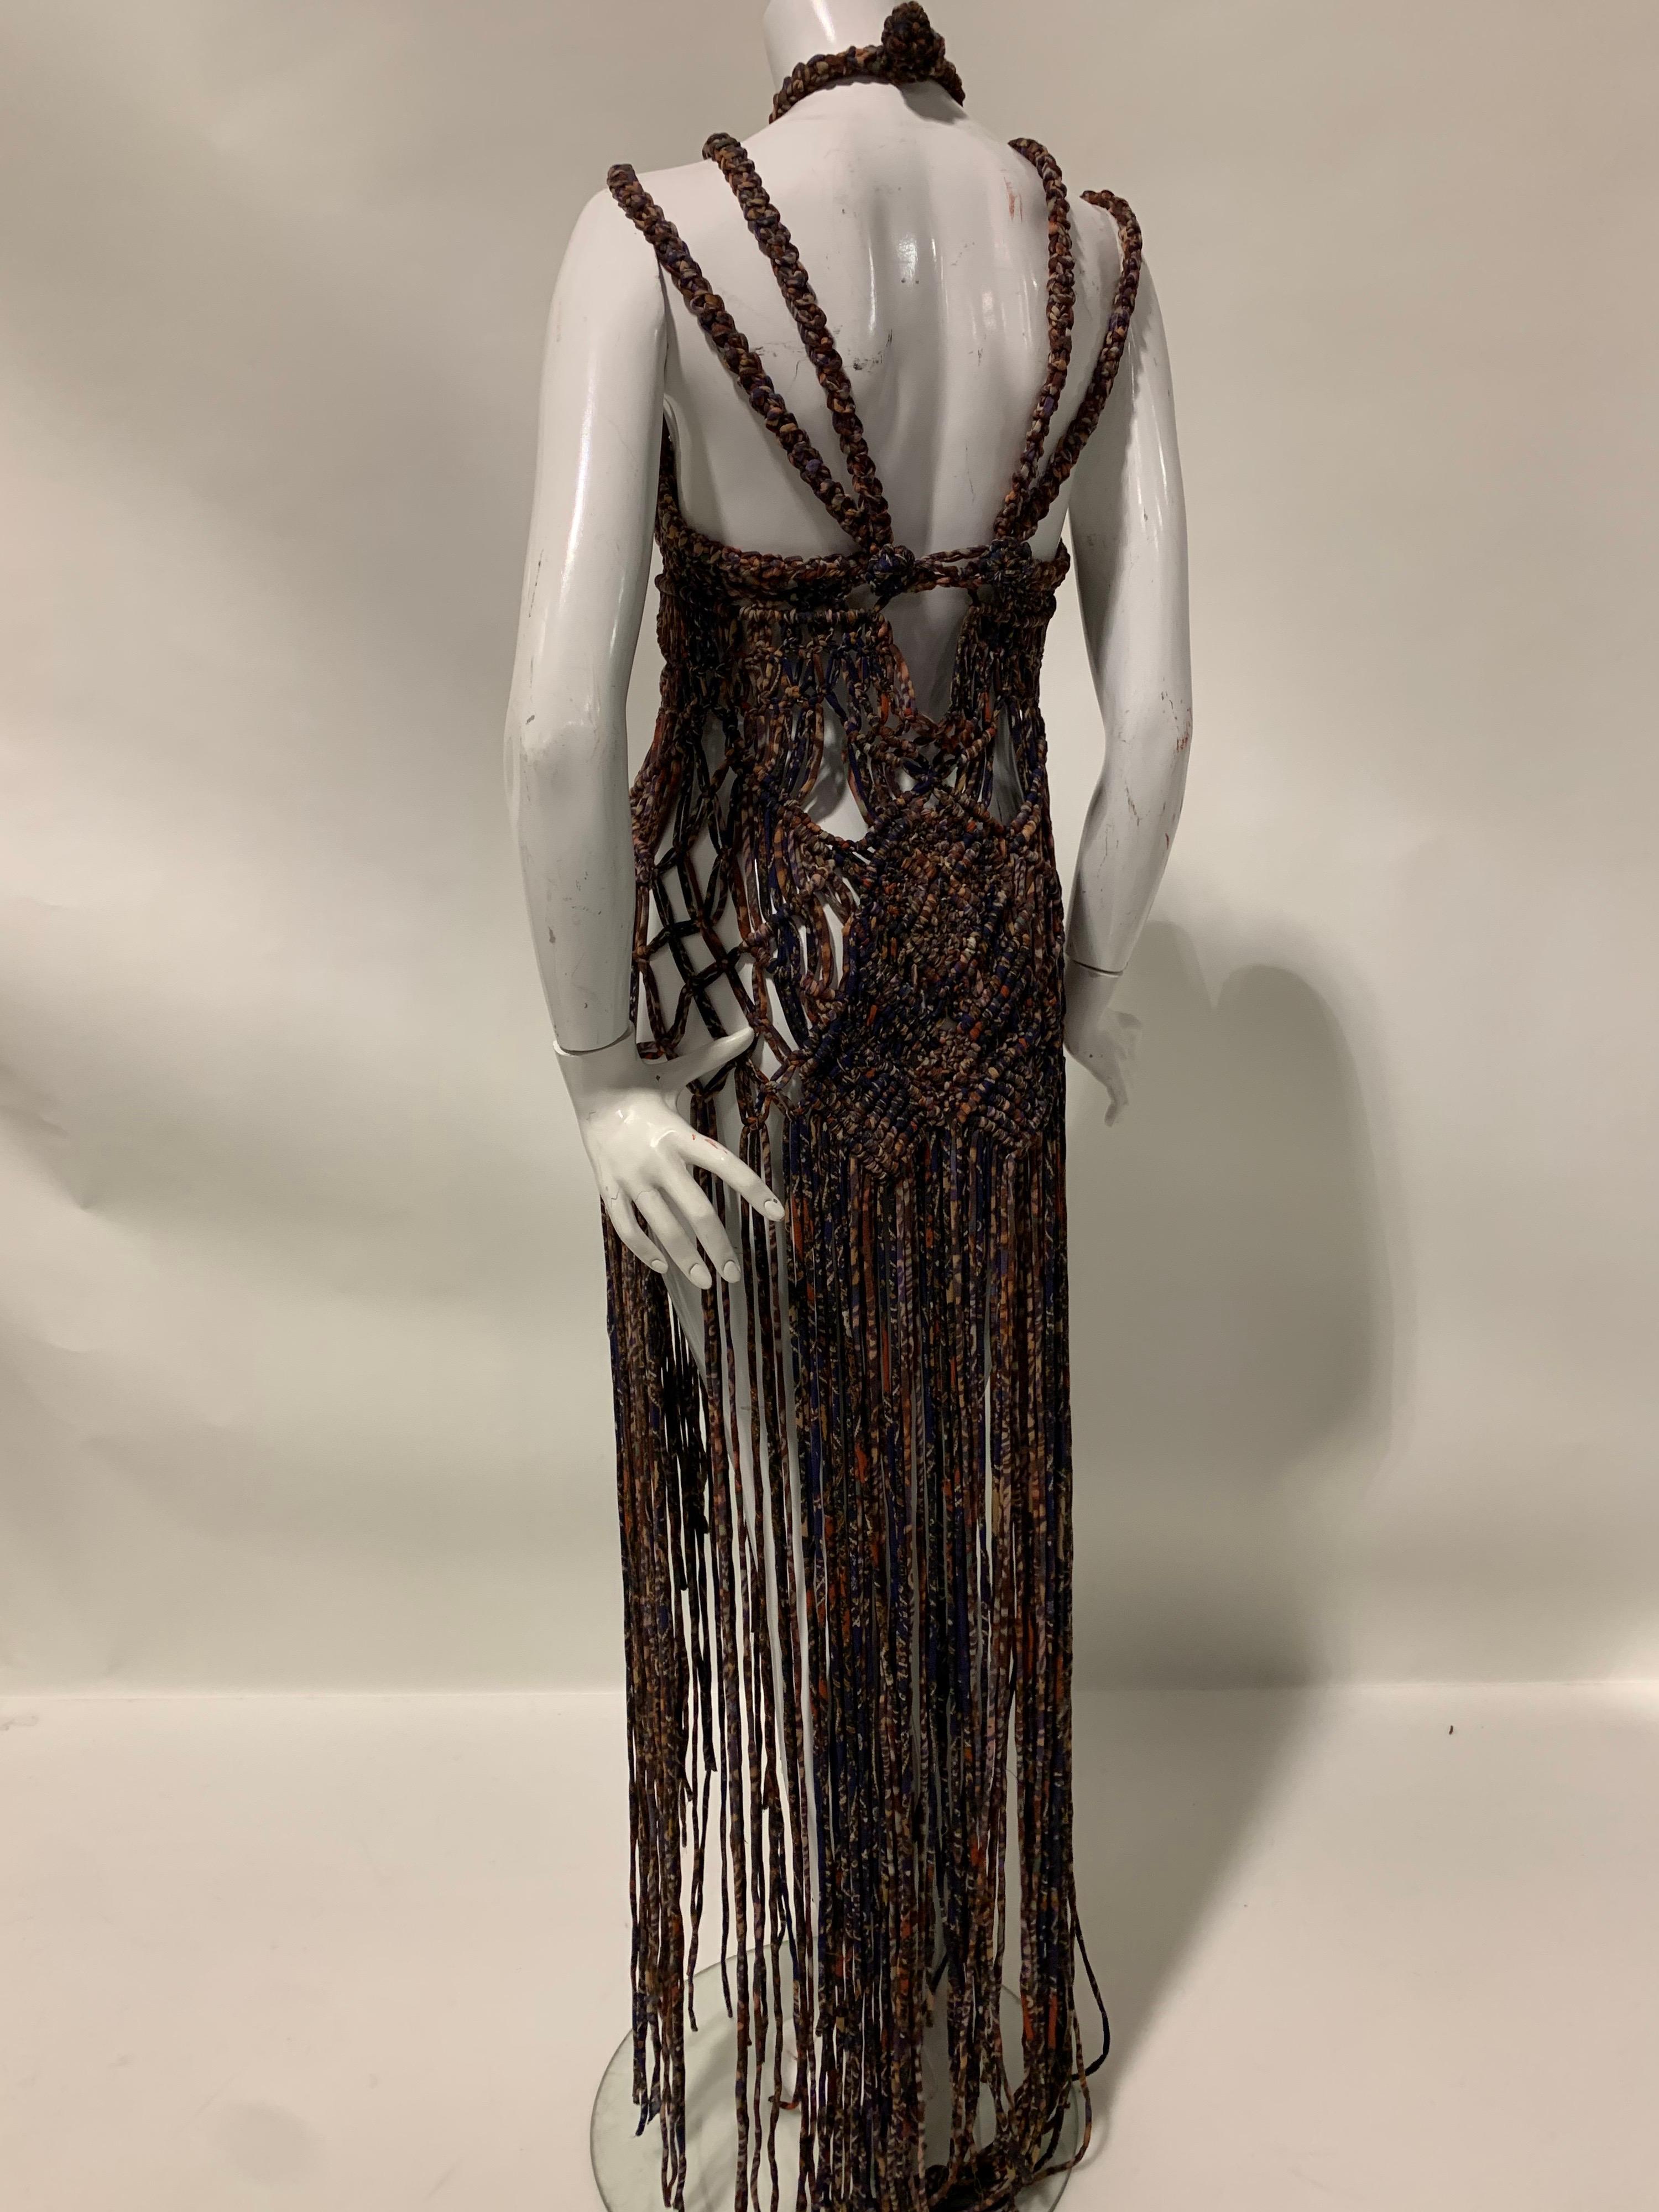 Torso Creations “Ibiza” Macrame Gown W/ Sculpted Bodice & Fringe  For Sale 3